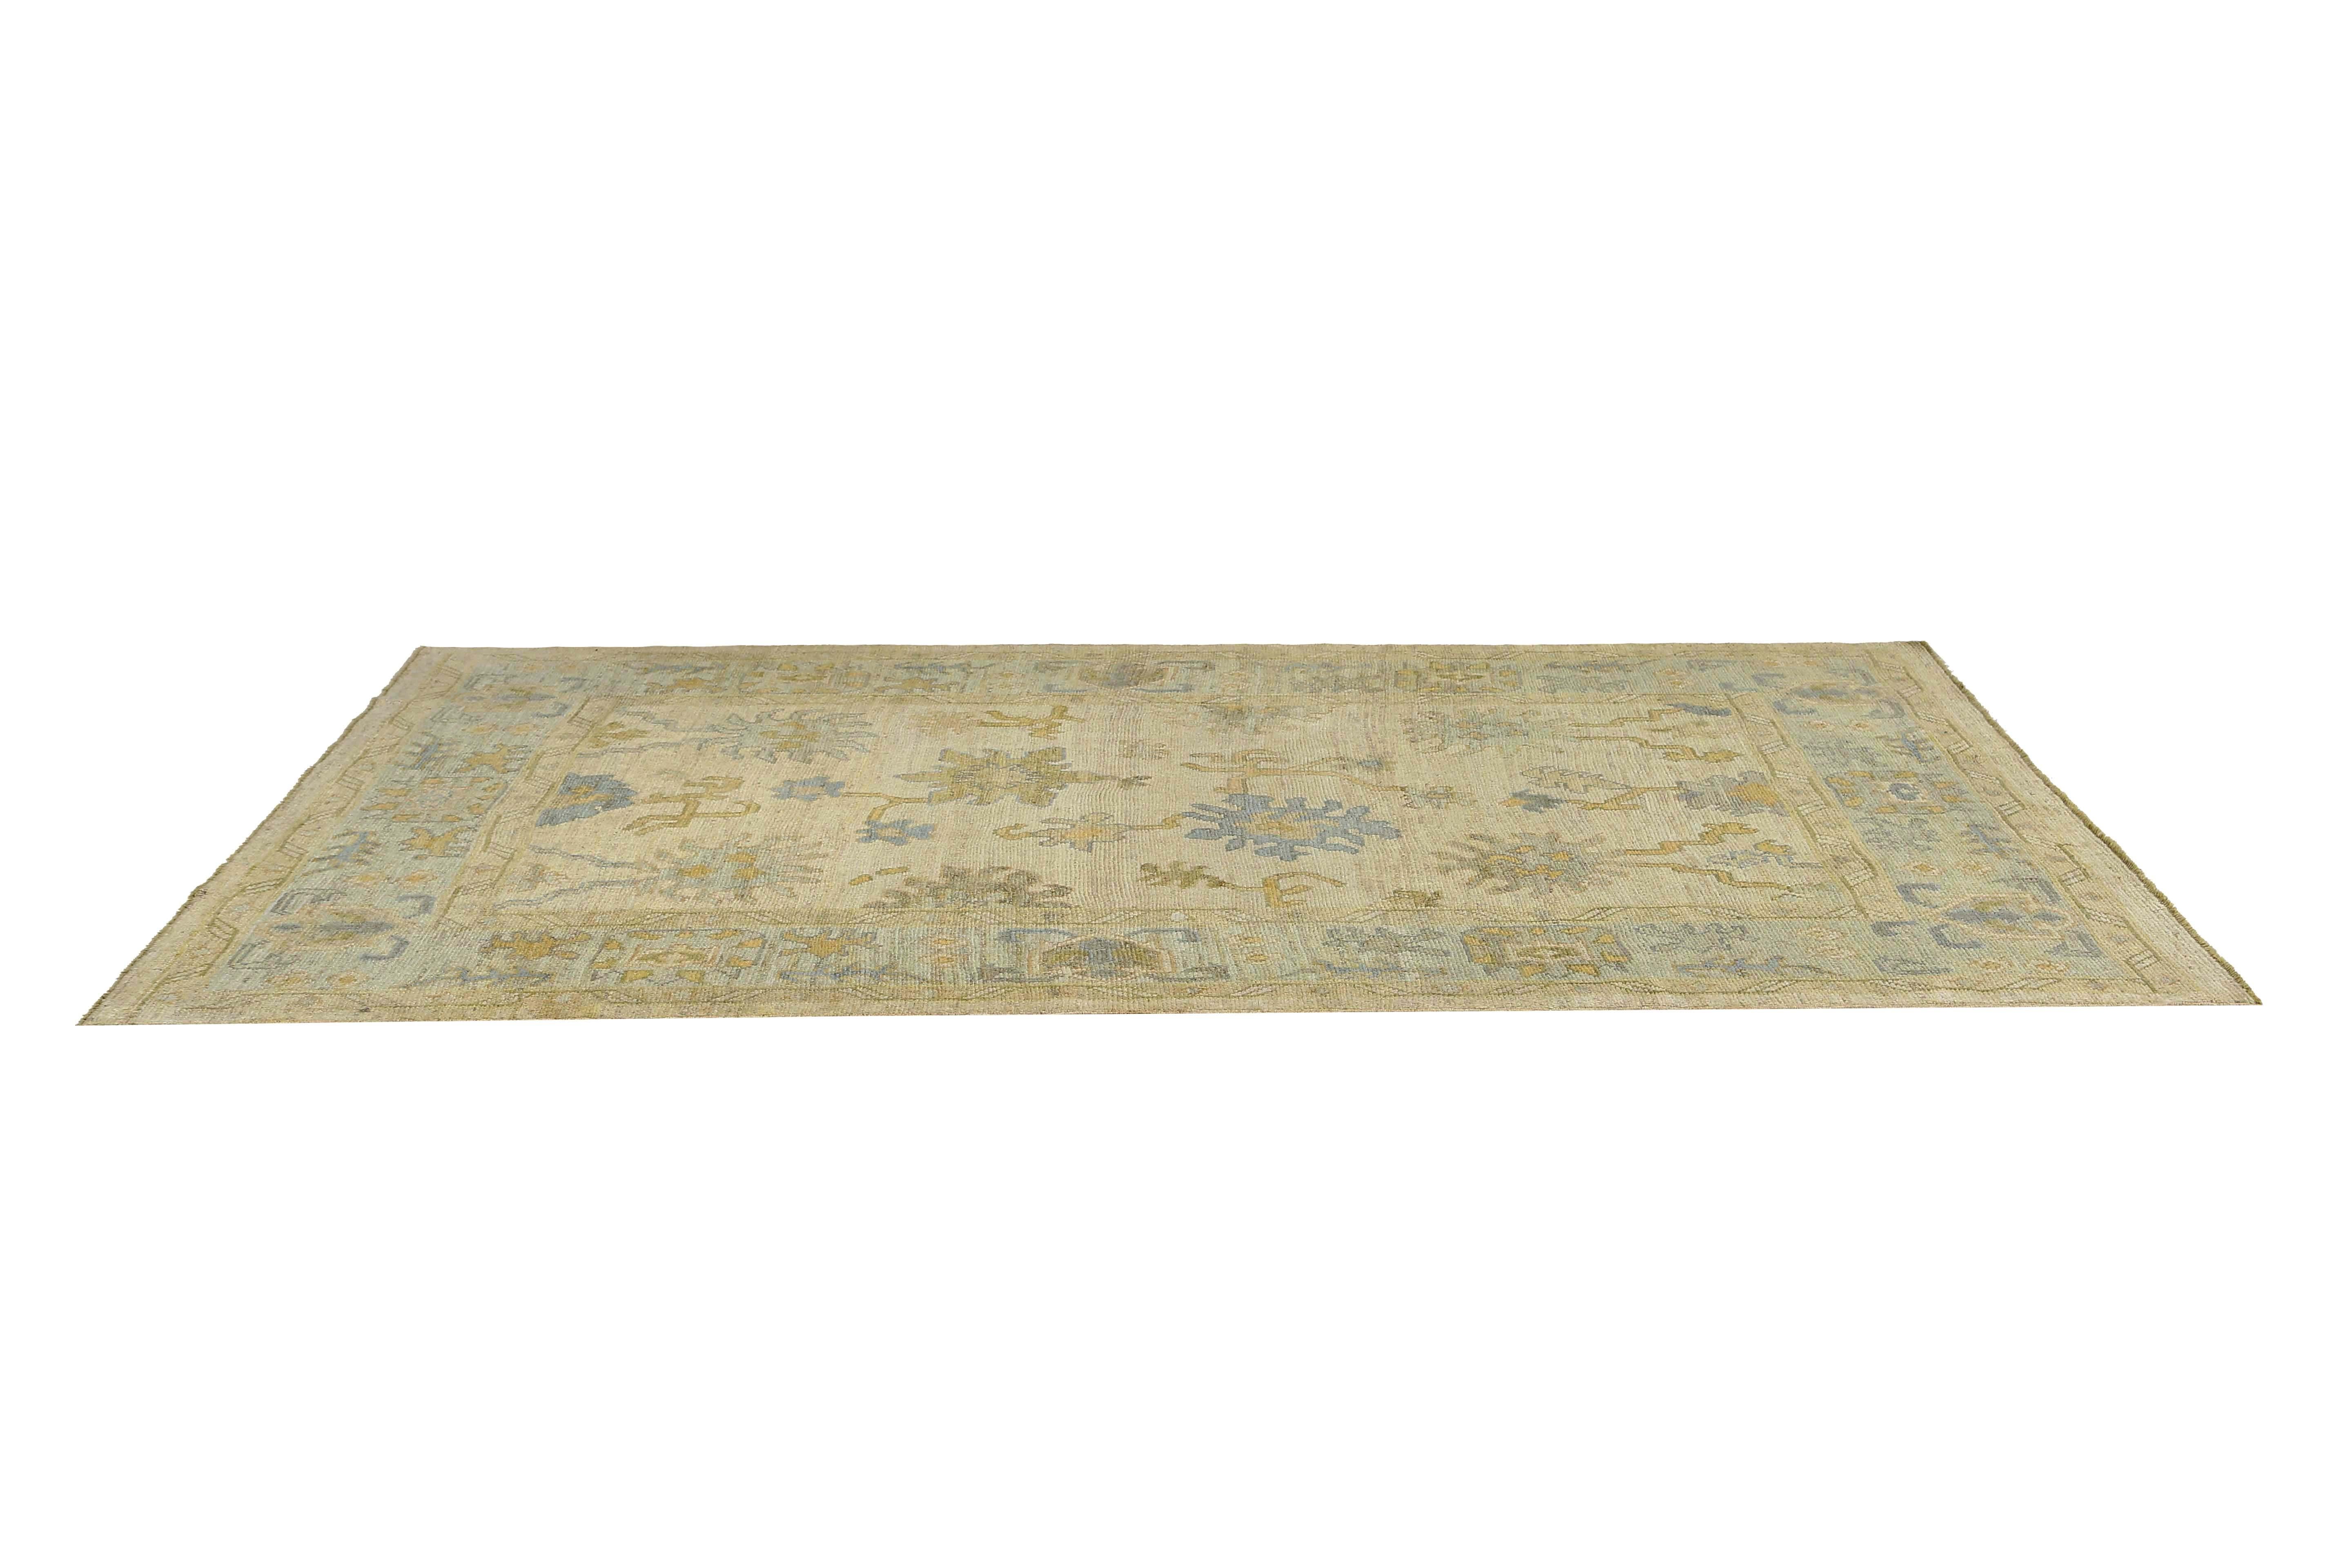 Bring a touch of elegance to your home with this exquisite Turkish Oushak rug. Handmade with care, this rug boasts a beautiful floral design that is sure to impress your guests. The colors of brown, green, and blue blend seamlessly together,